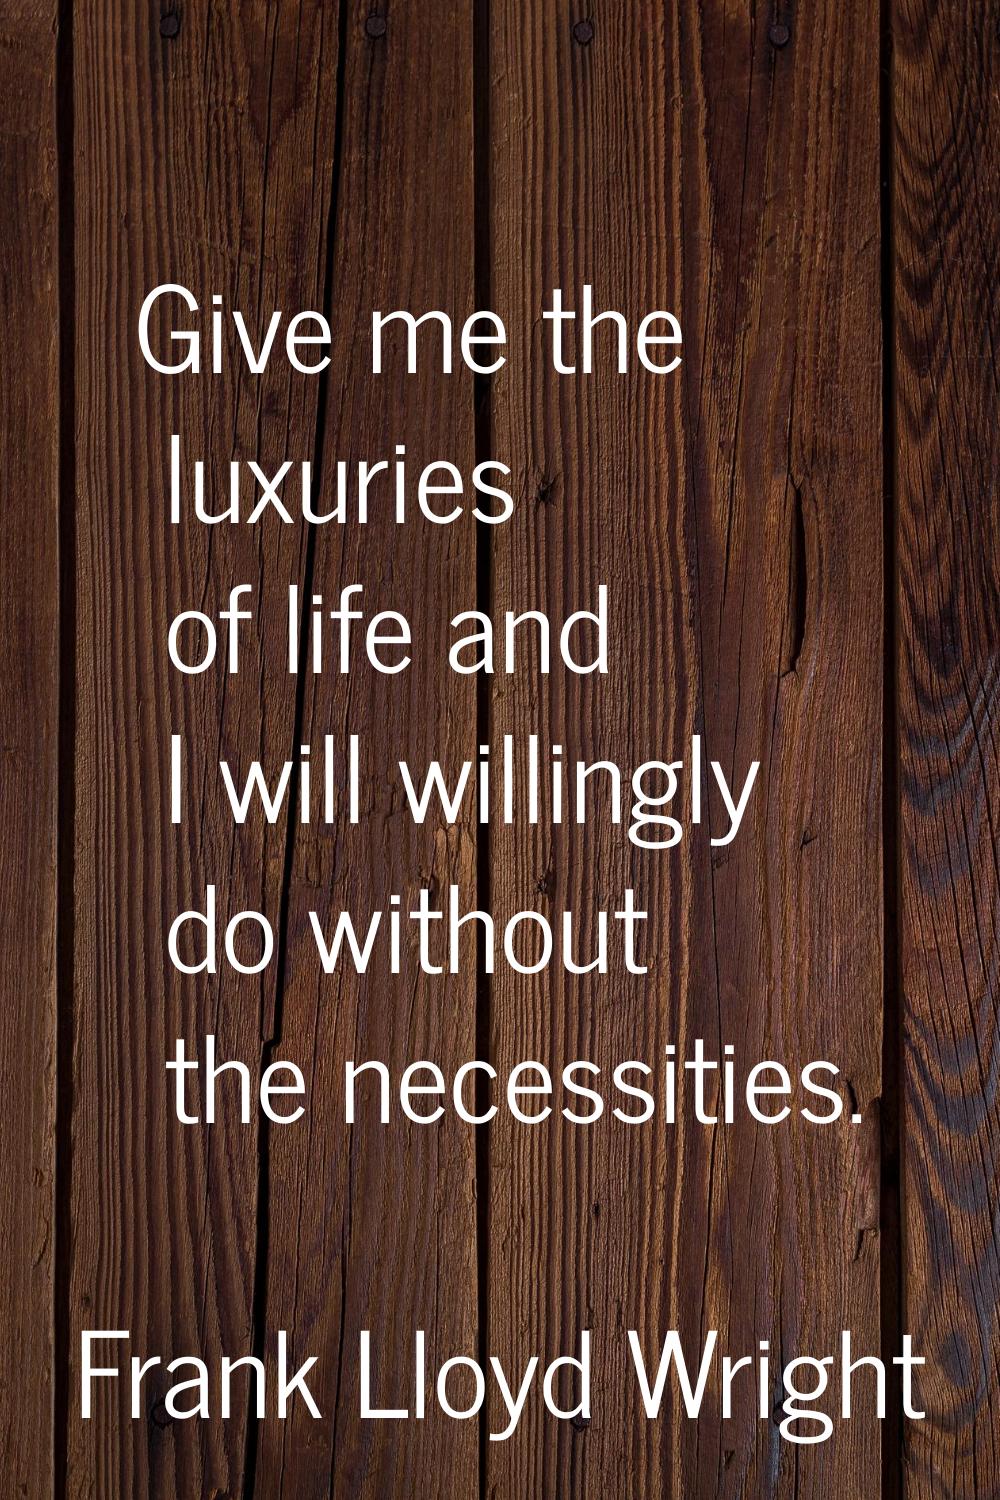 Give me the luxuries of life and I will willingly do without the necessities.